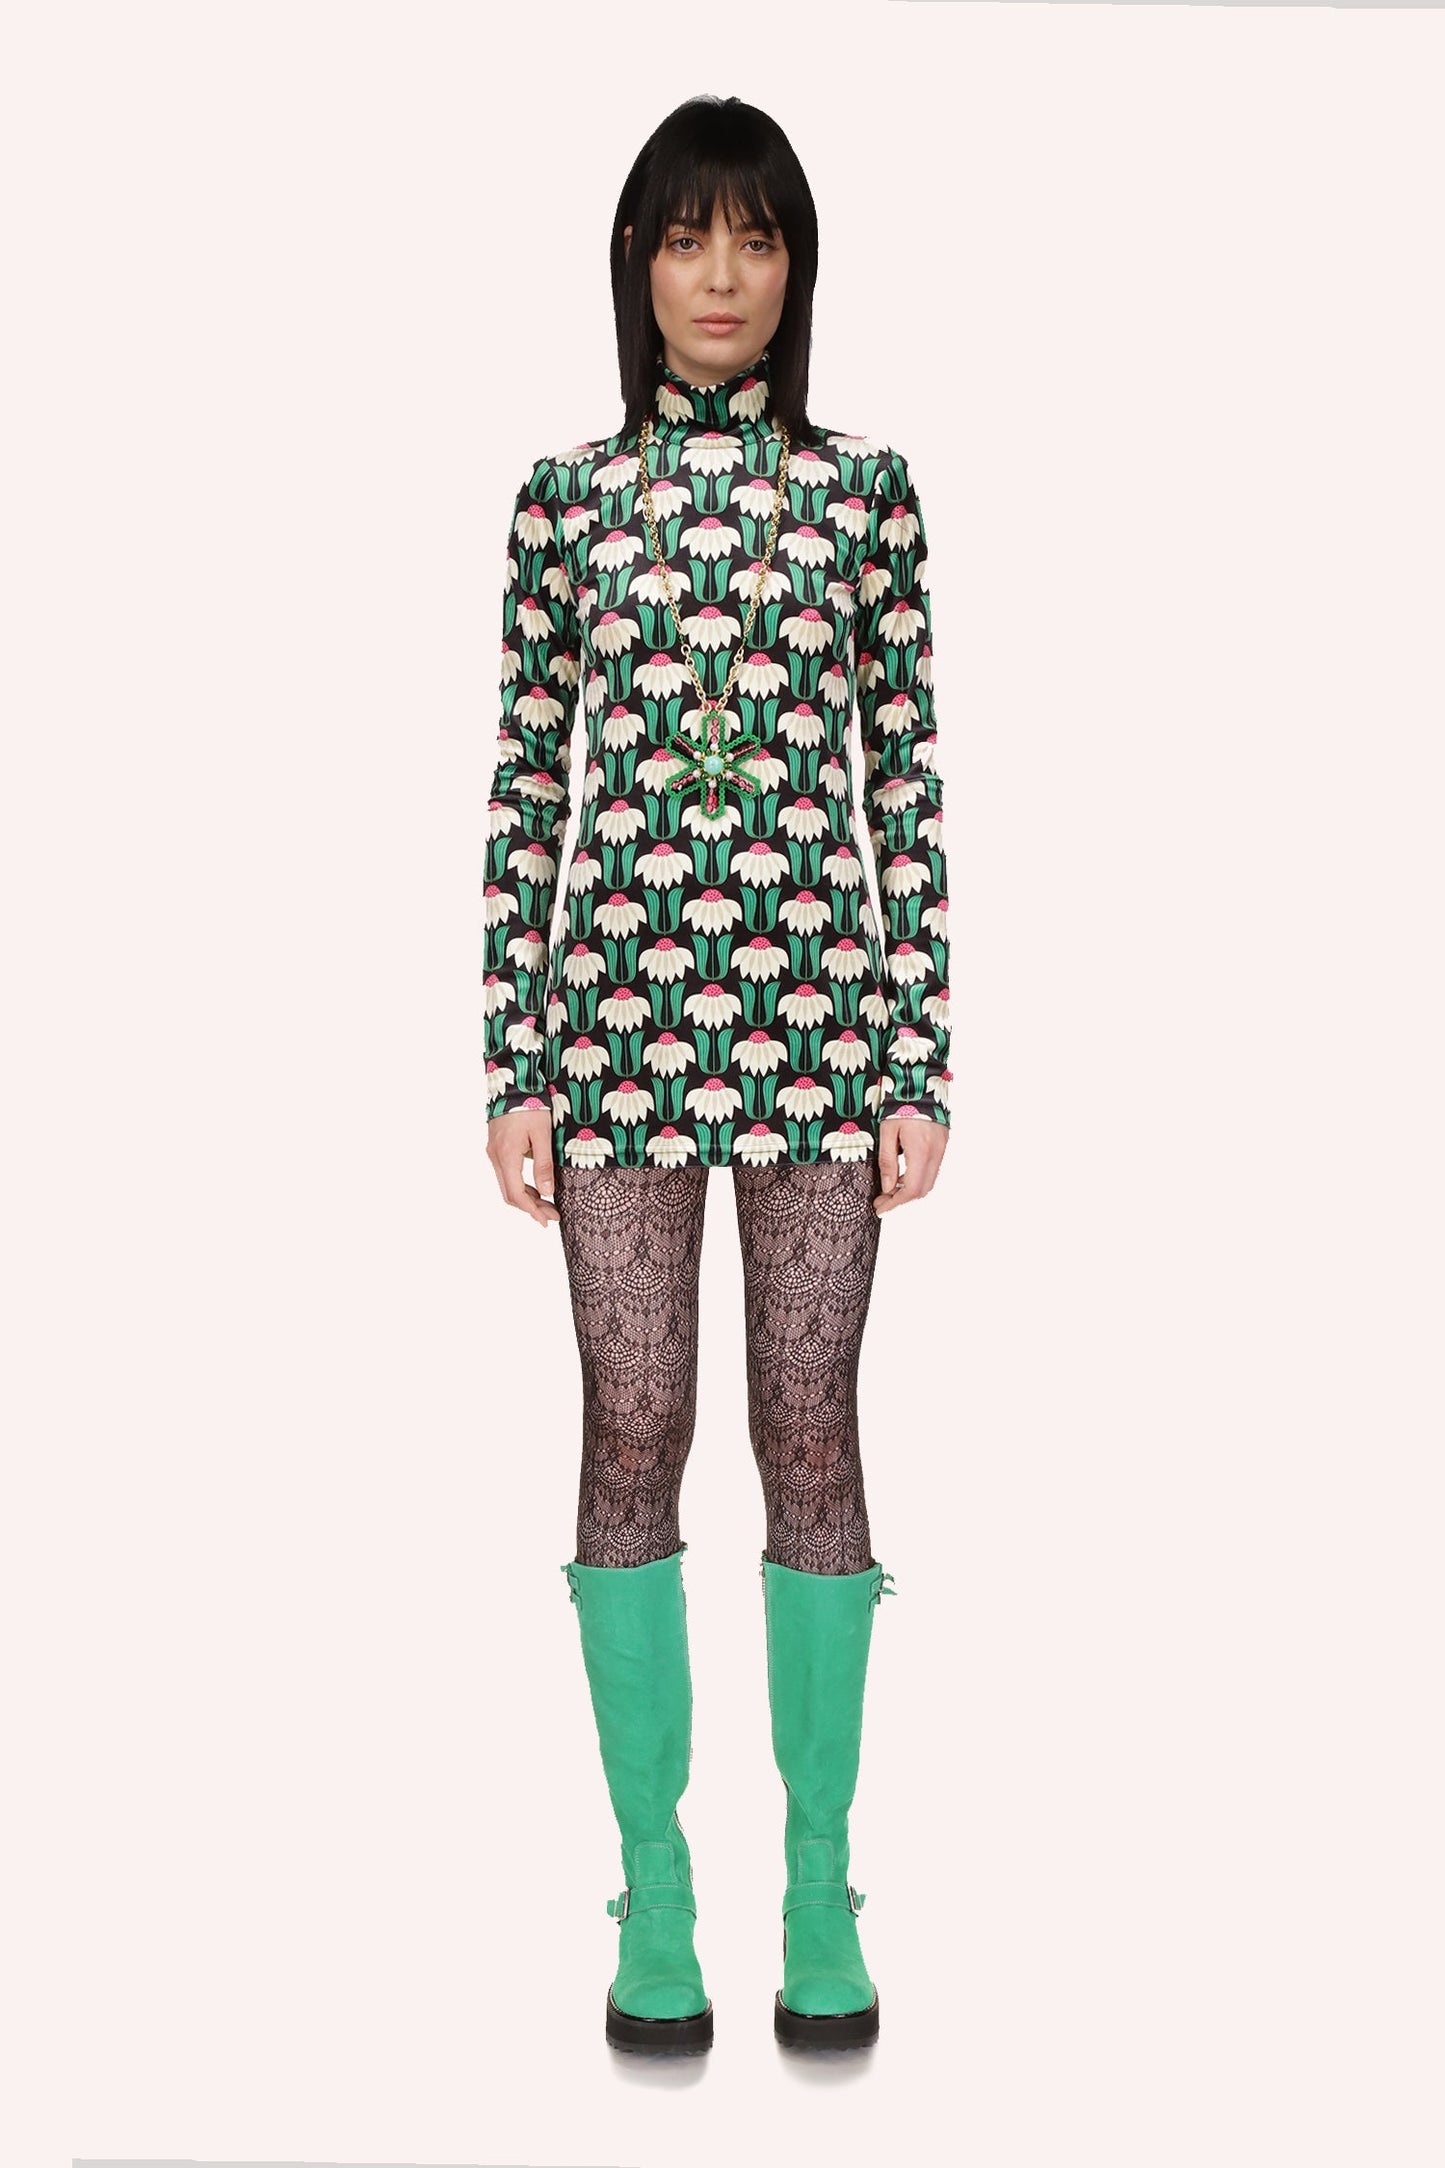 Velvet, mini-dress, long sleeve, turtleneck, with pattern of white daisies, pink hearts, green leaves